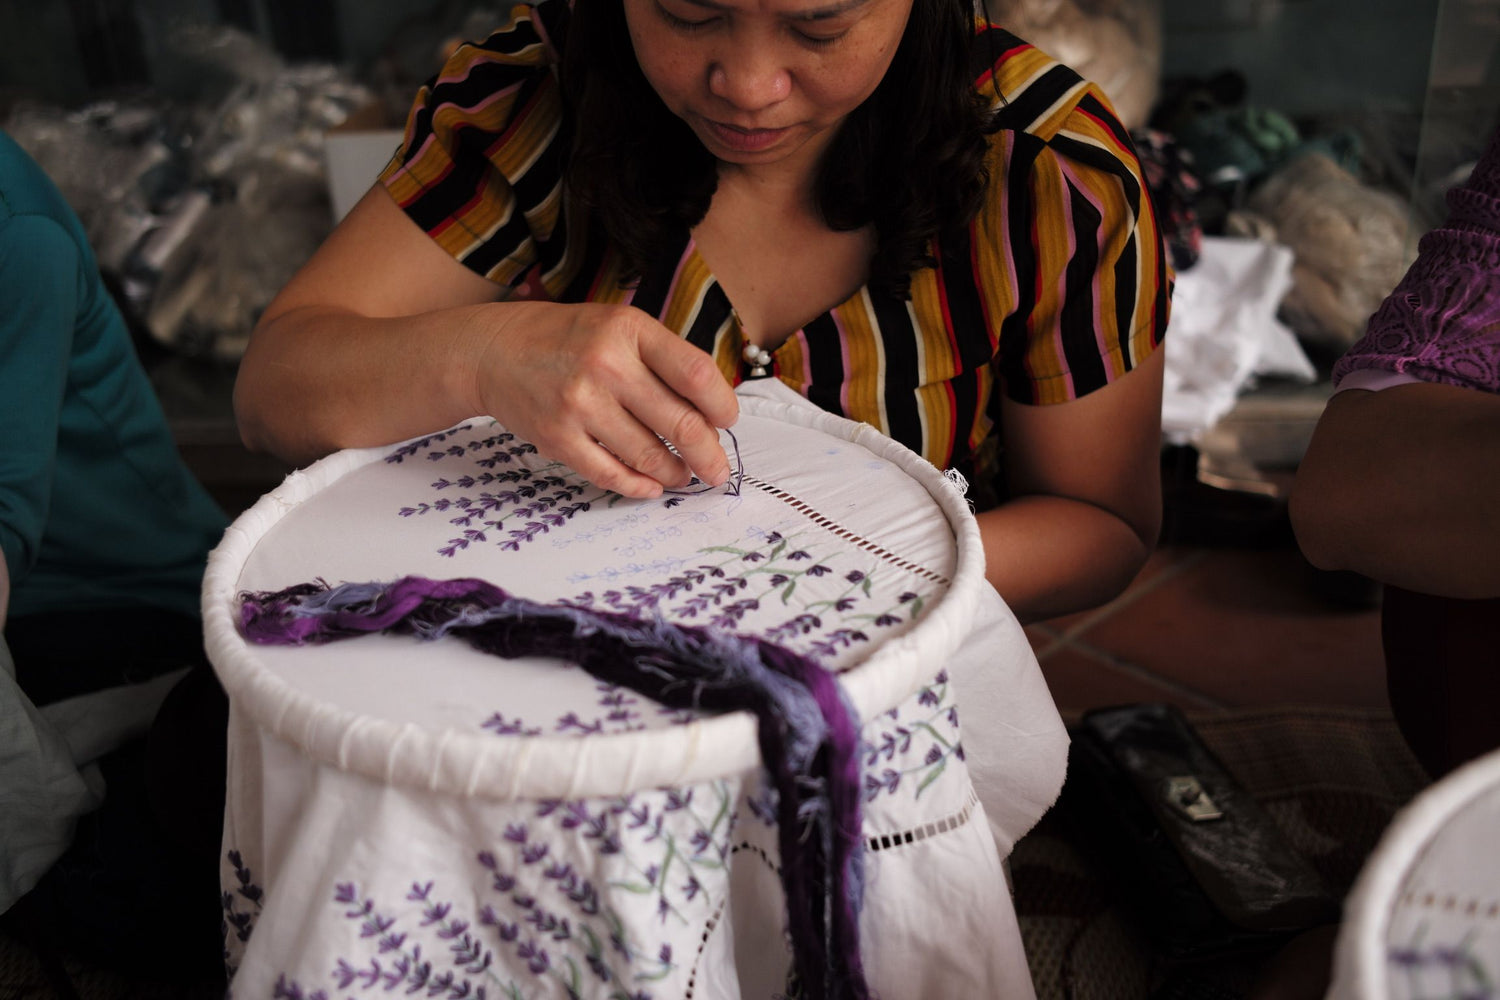 Woman in striped shirt sitting on the ground hand-embroidering white cloth with purple design